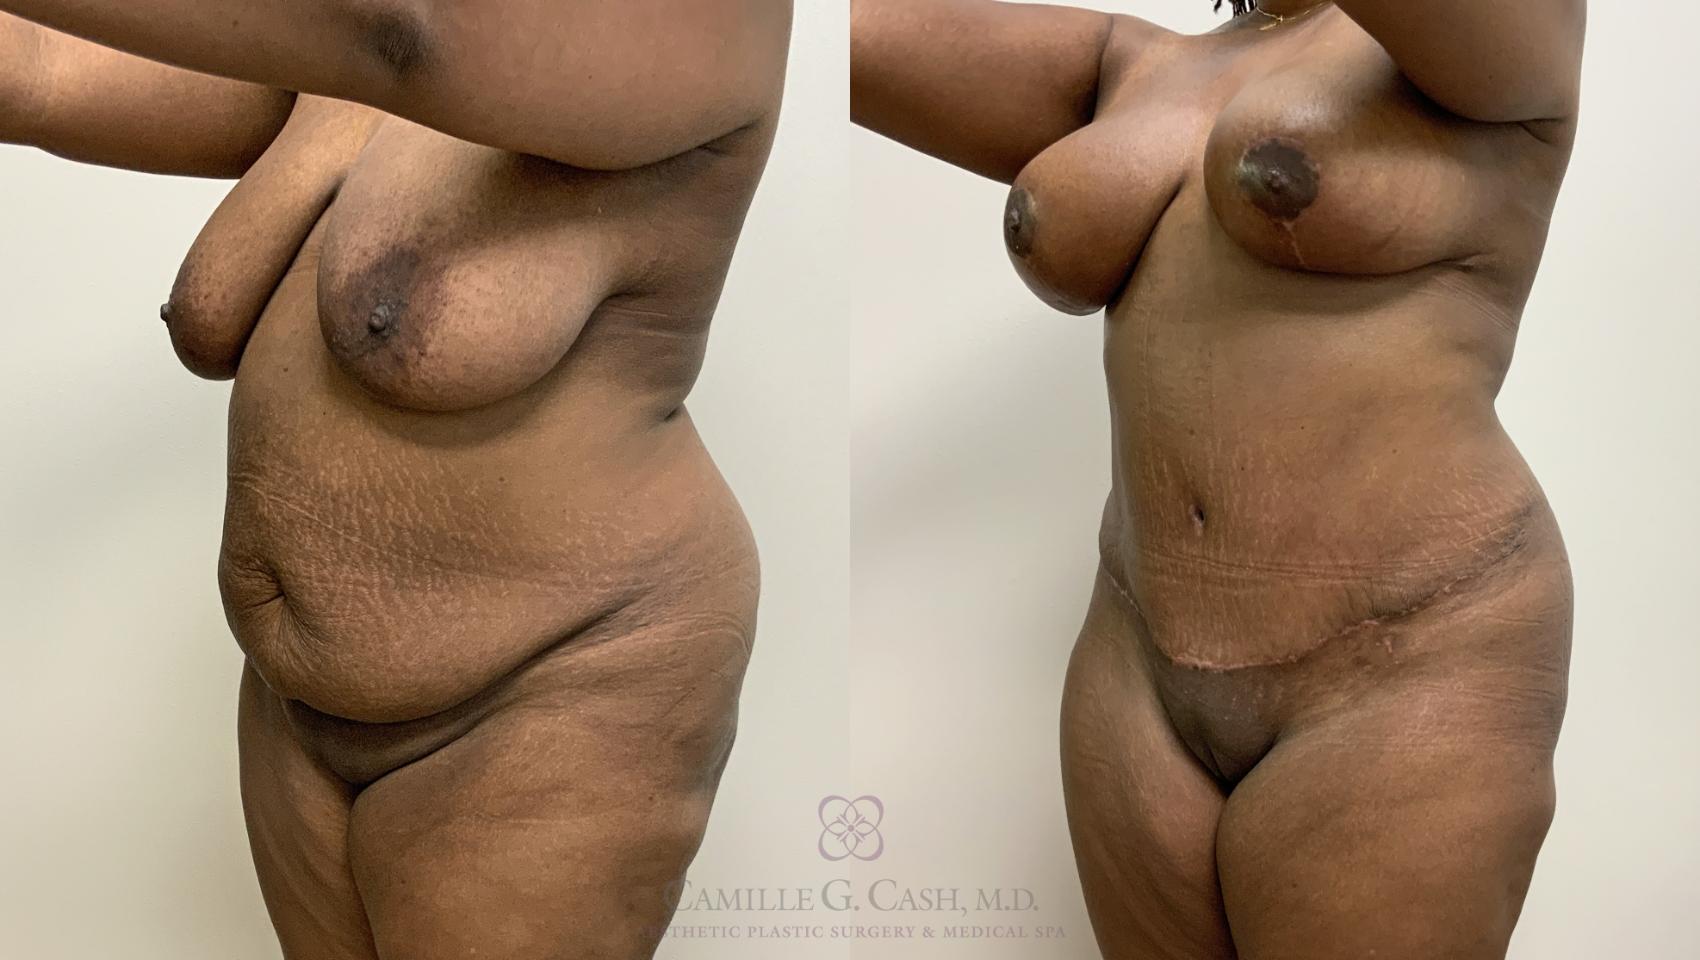 Before and after a tummy tuck, liposuction, and breast reduction